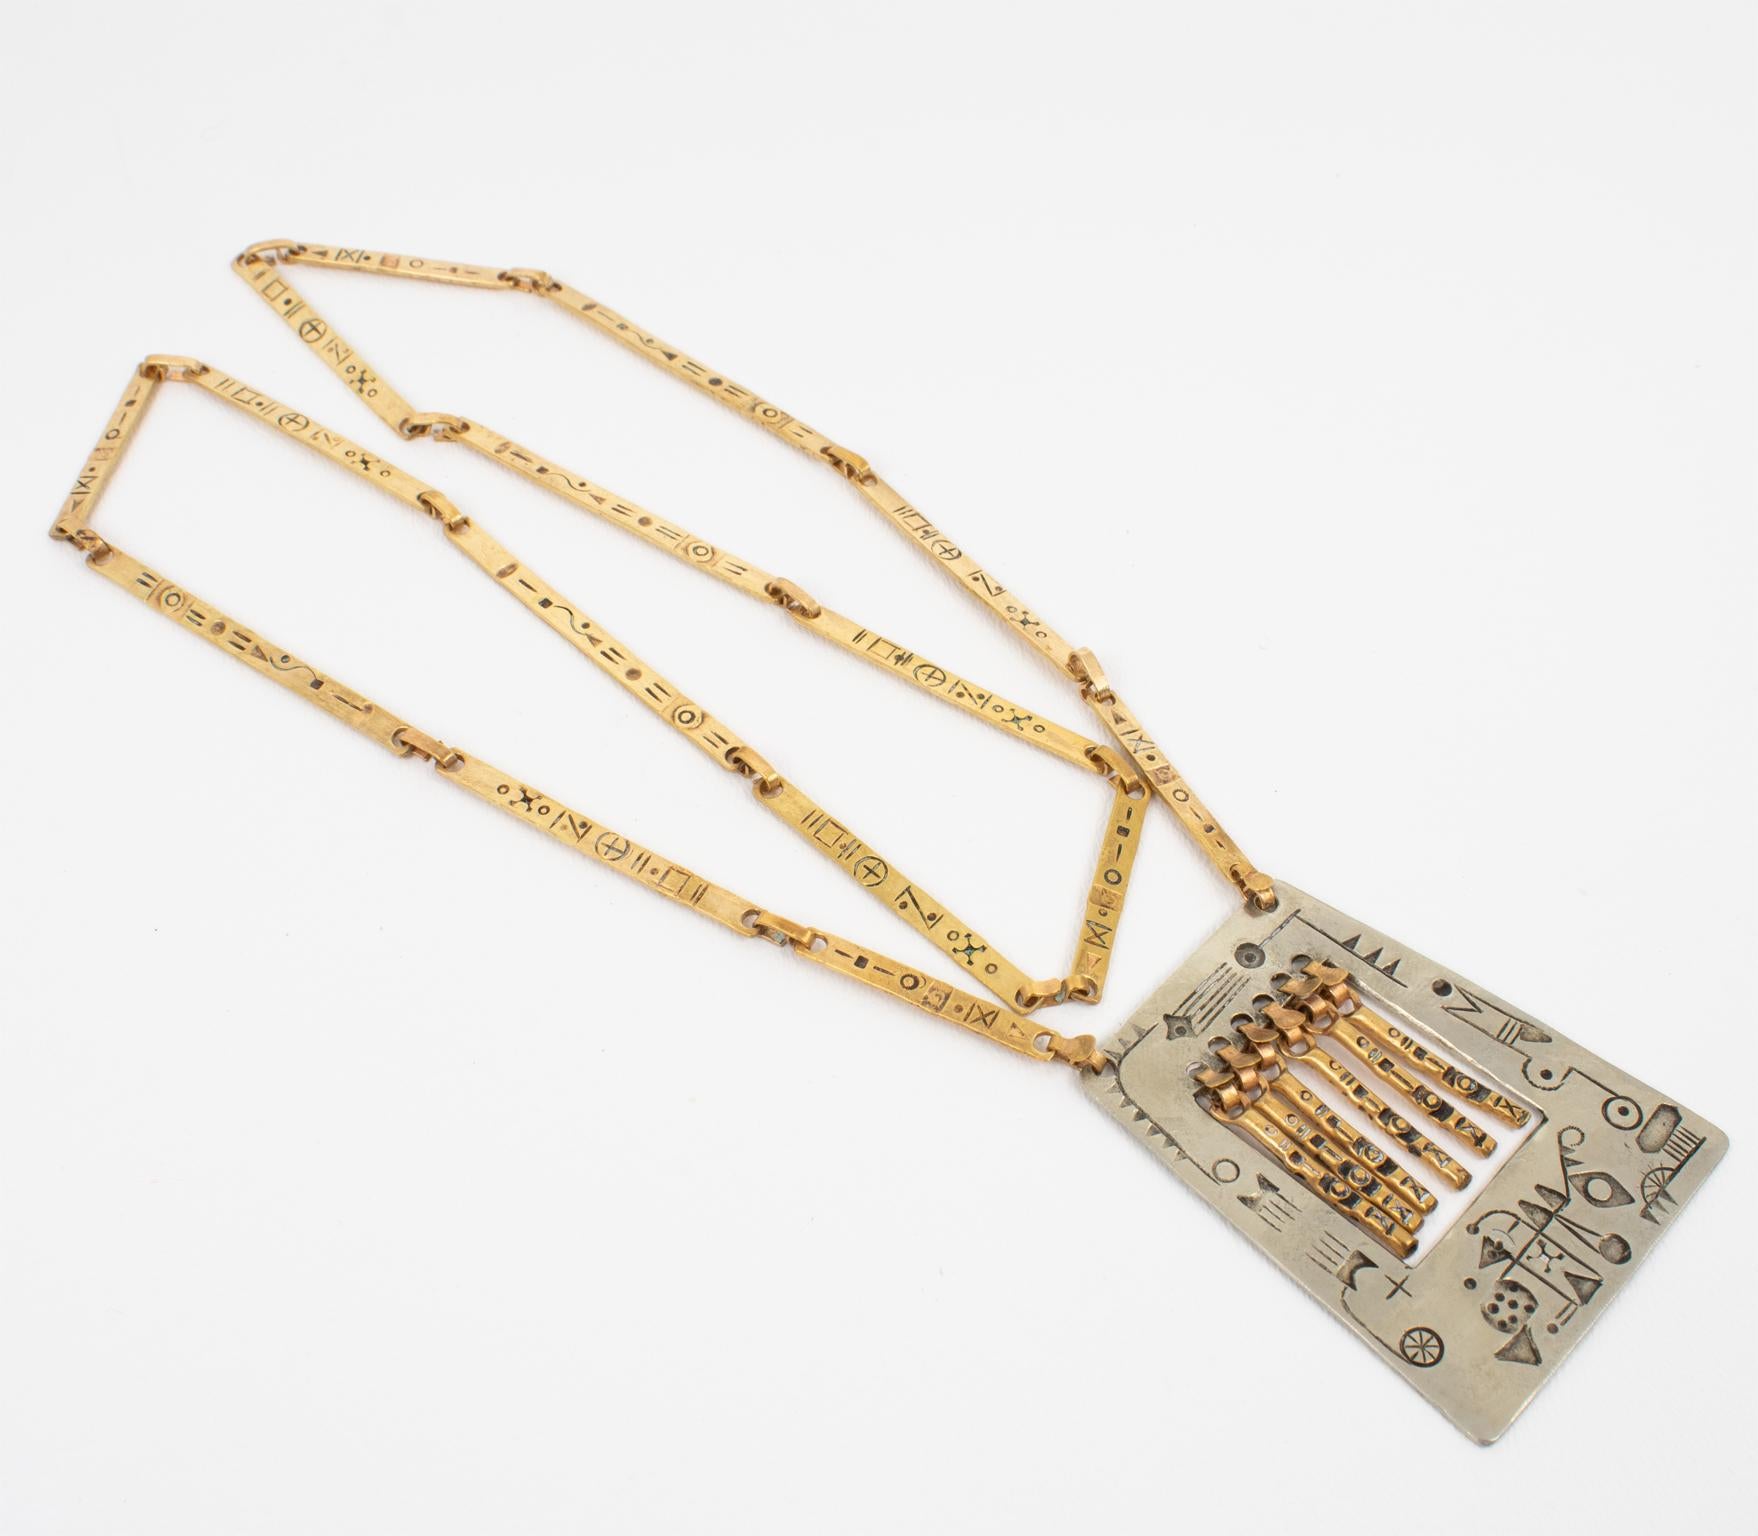 Modernist Brass and Silvered Metal Hieroglyph or Ethnic Graffiti Necklace, 1960s For Sale 1